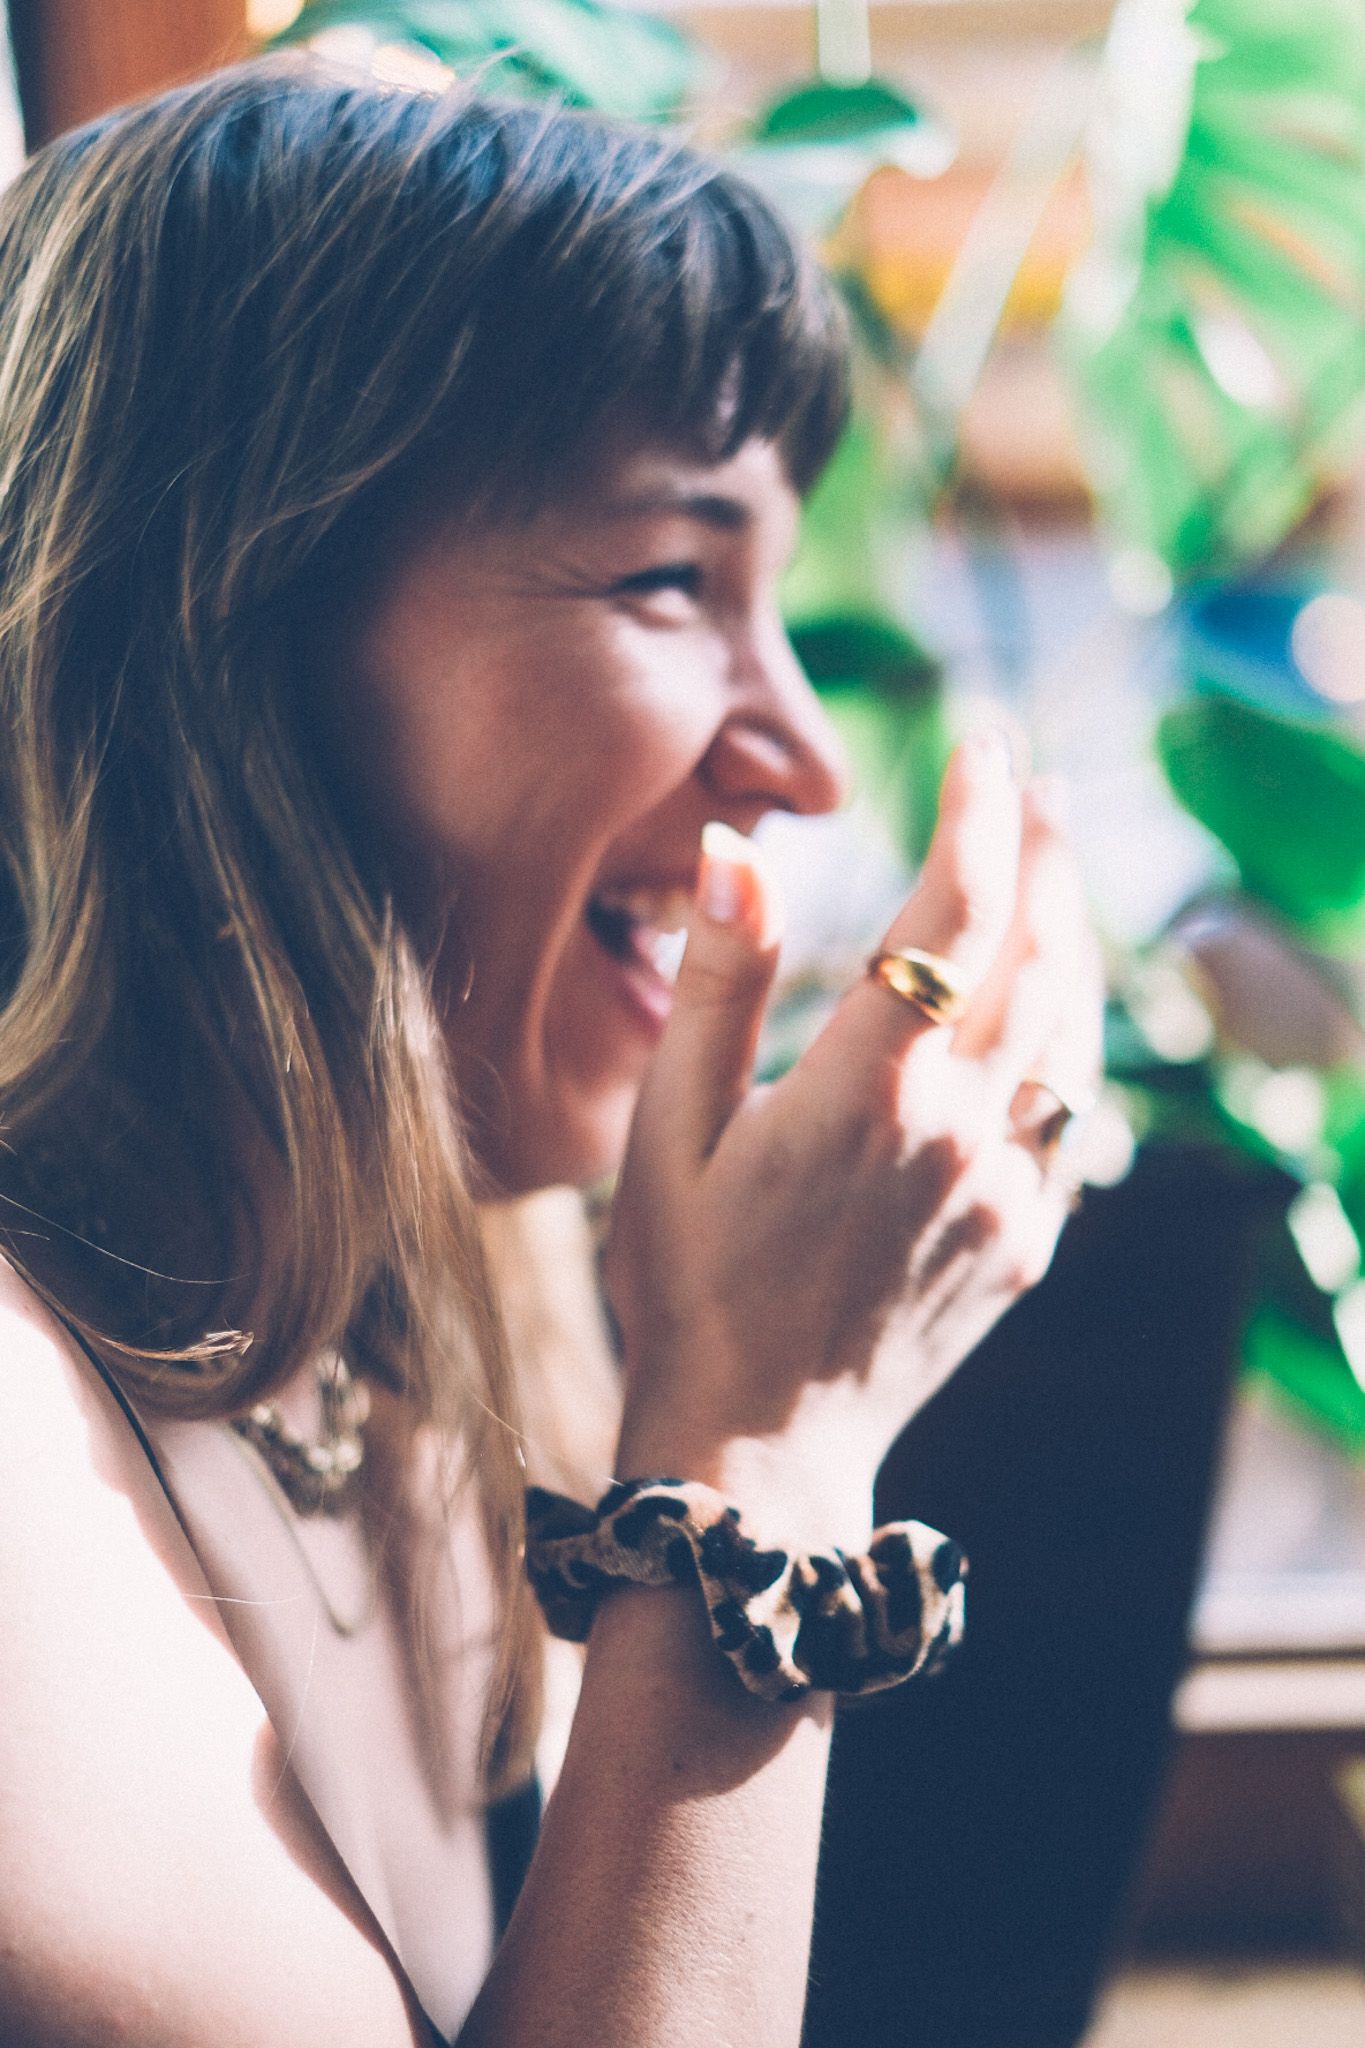 A close-up side profile of a woman laughing with her hand up, wrist wrapped with a leopard print scrunchie. Natural light floods in from the window in the background, plants standing just out of focus.